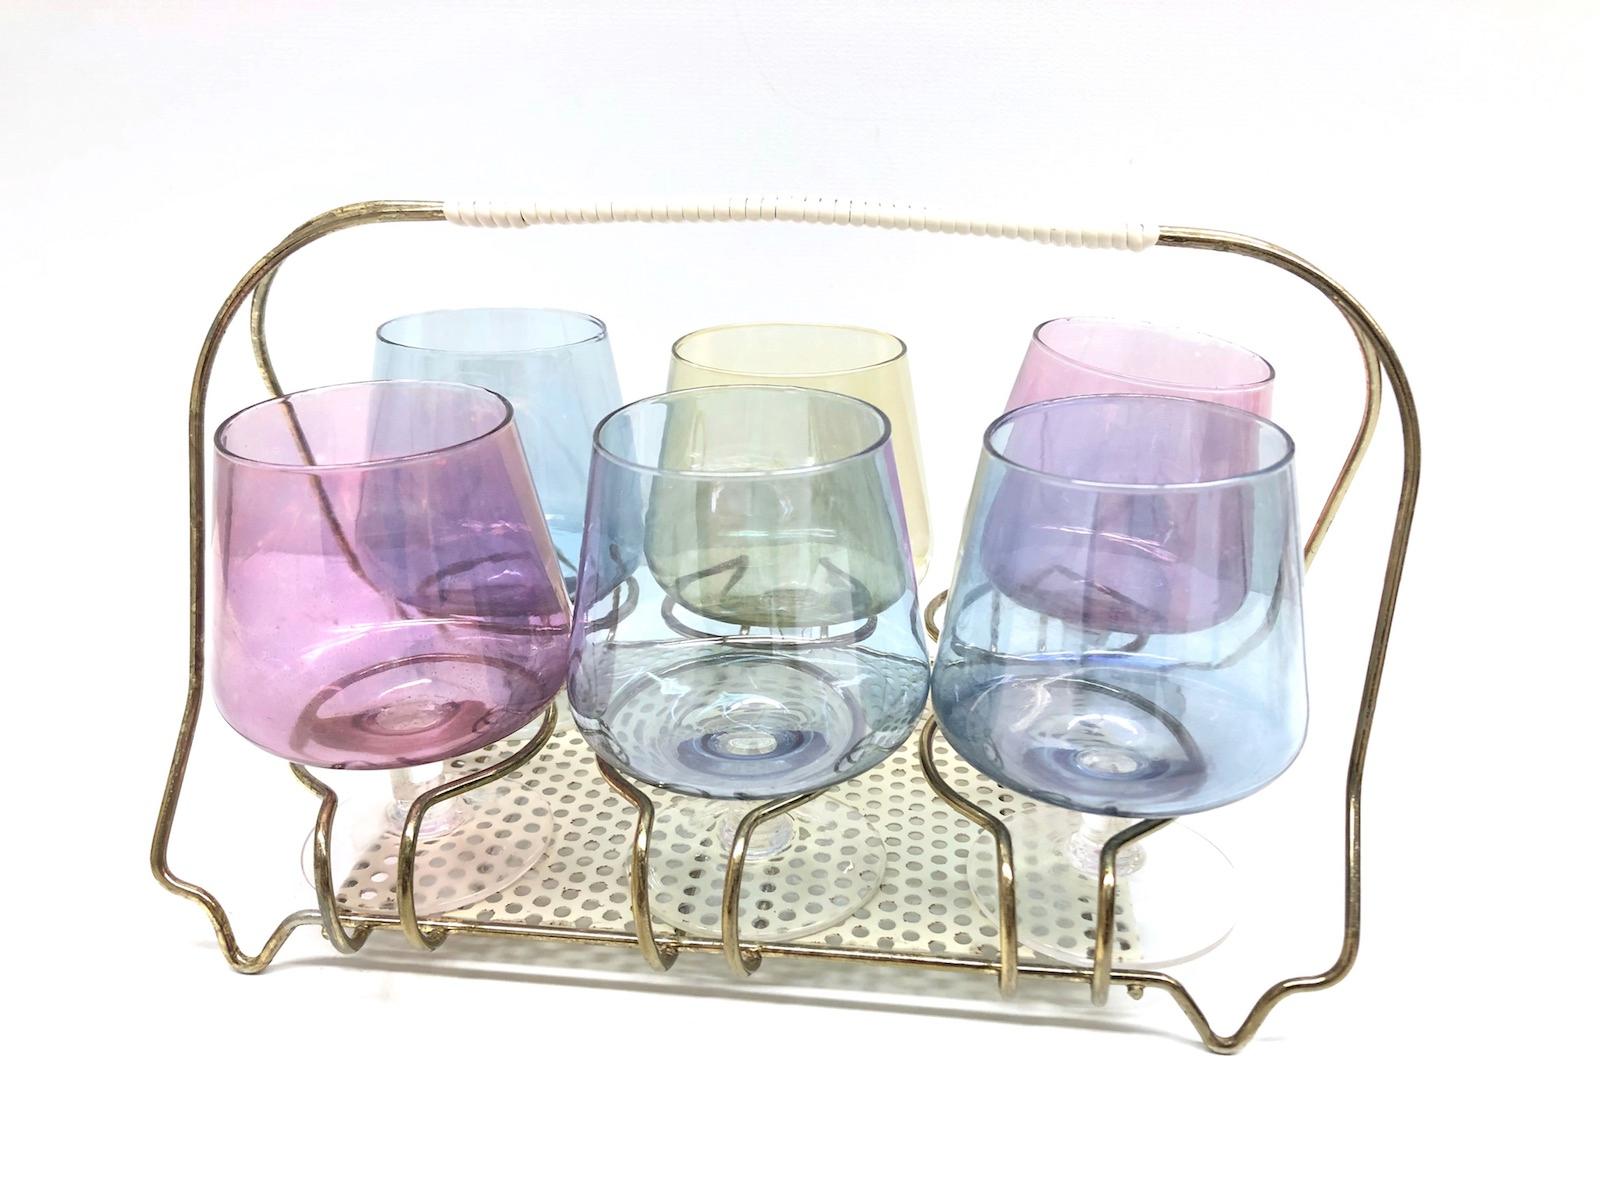 A Mid-Century Modern Barware caddy or display Stand. It holds six cognac snifters glasses. It is made of brass wire, plastic string handle and mouth blown glasses. Each glass is approximate 3 ¼